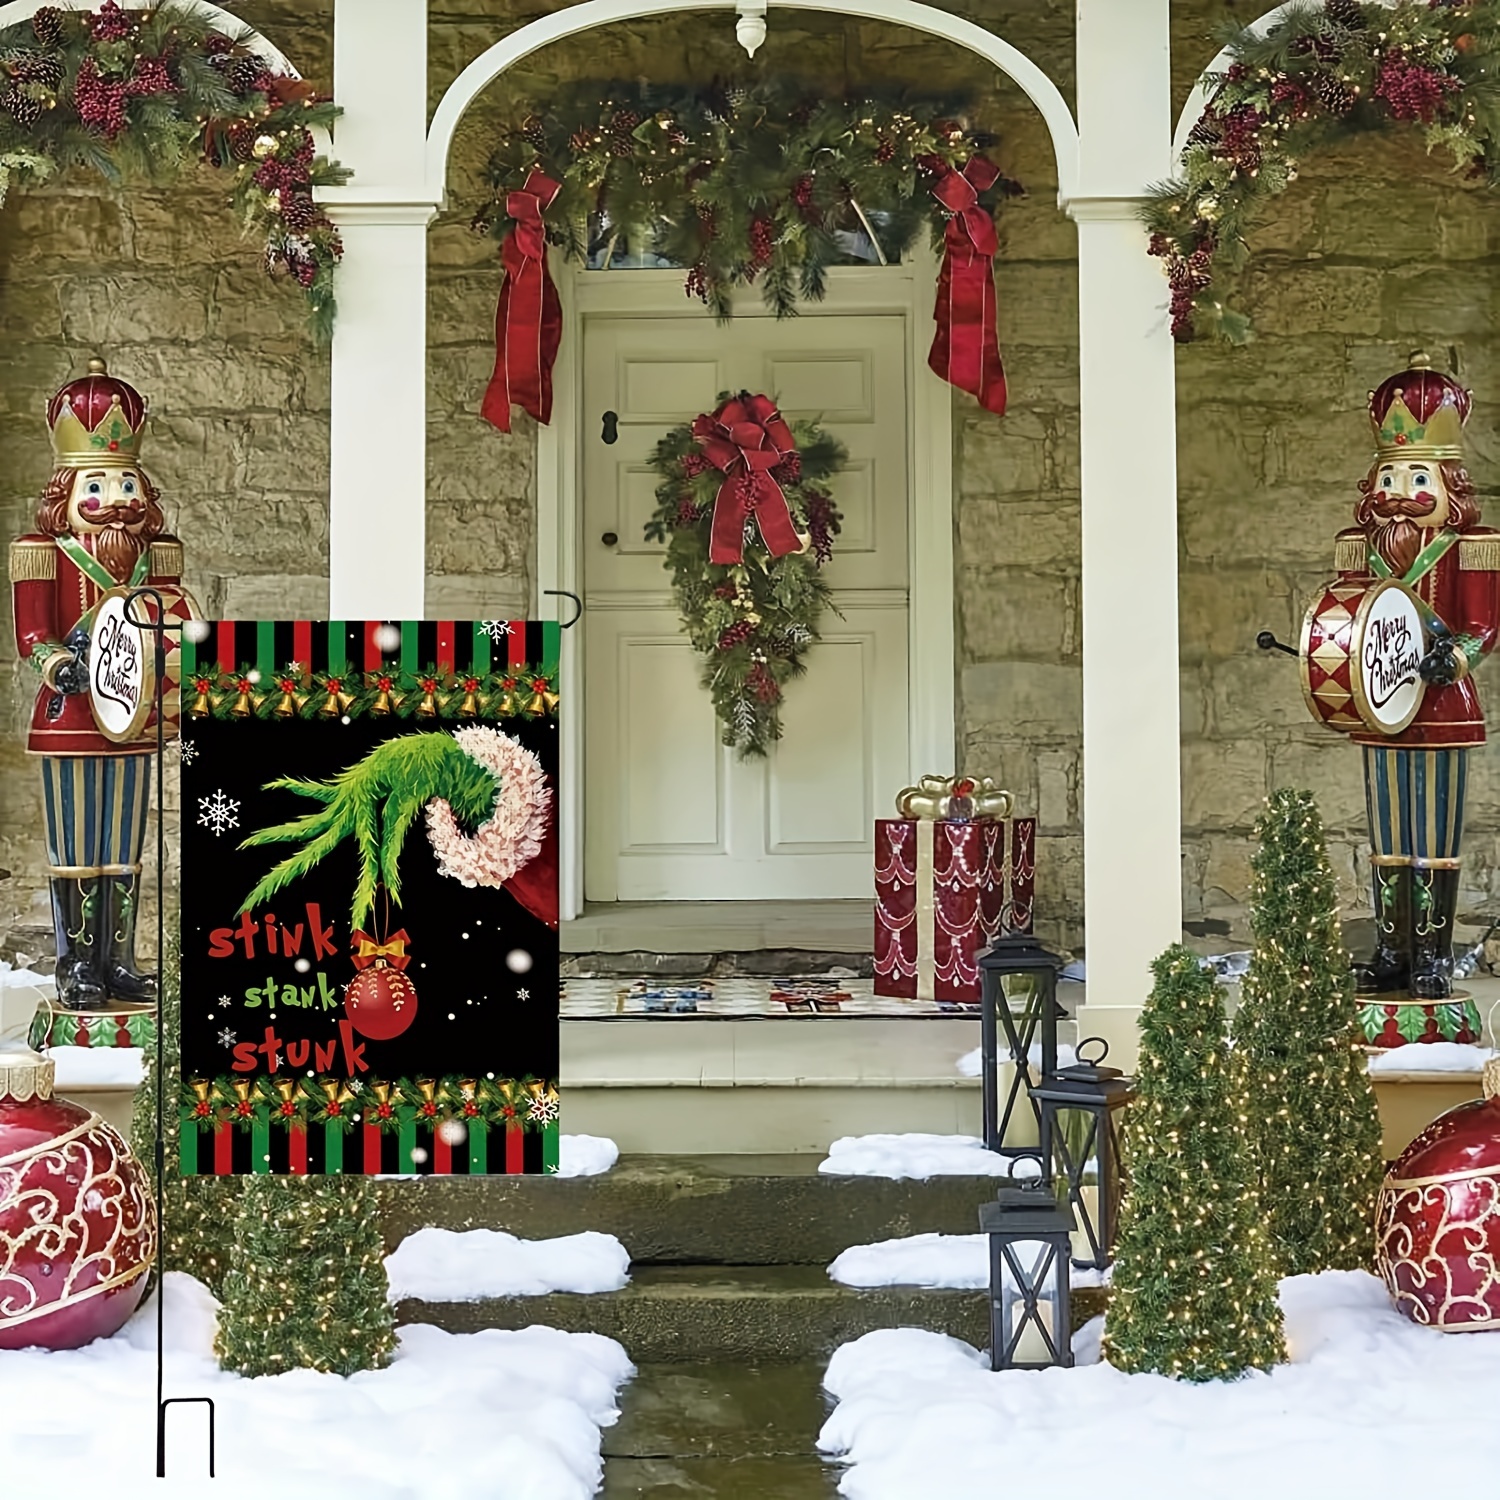 1pc 12x18 Inch Christmas Garden Flag Double Sided Small Vertical Winter Farmhouse Small Garden Yard Flags For Holiday Merry Christmas Decorations No Metal Brace details 3